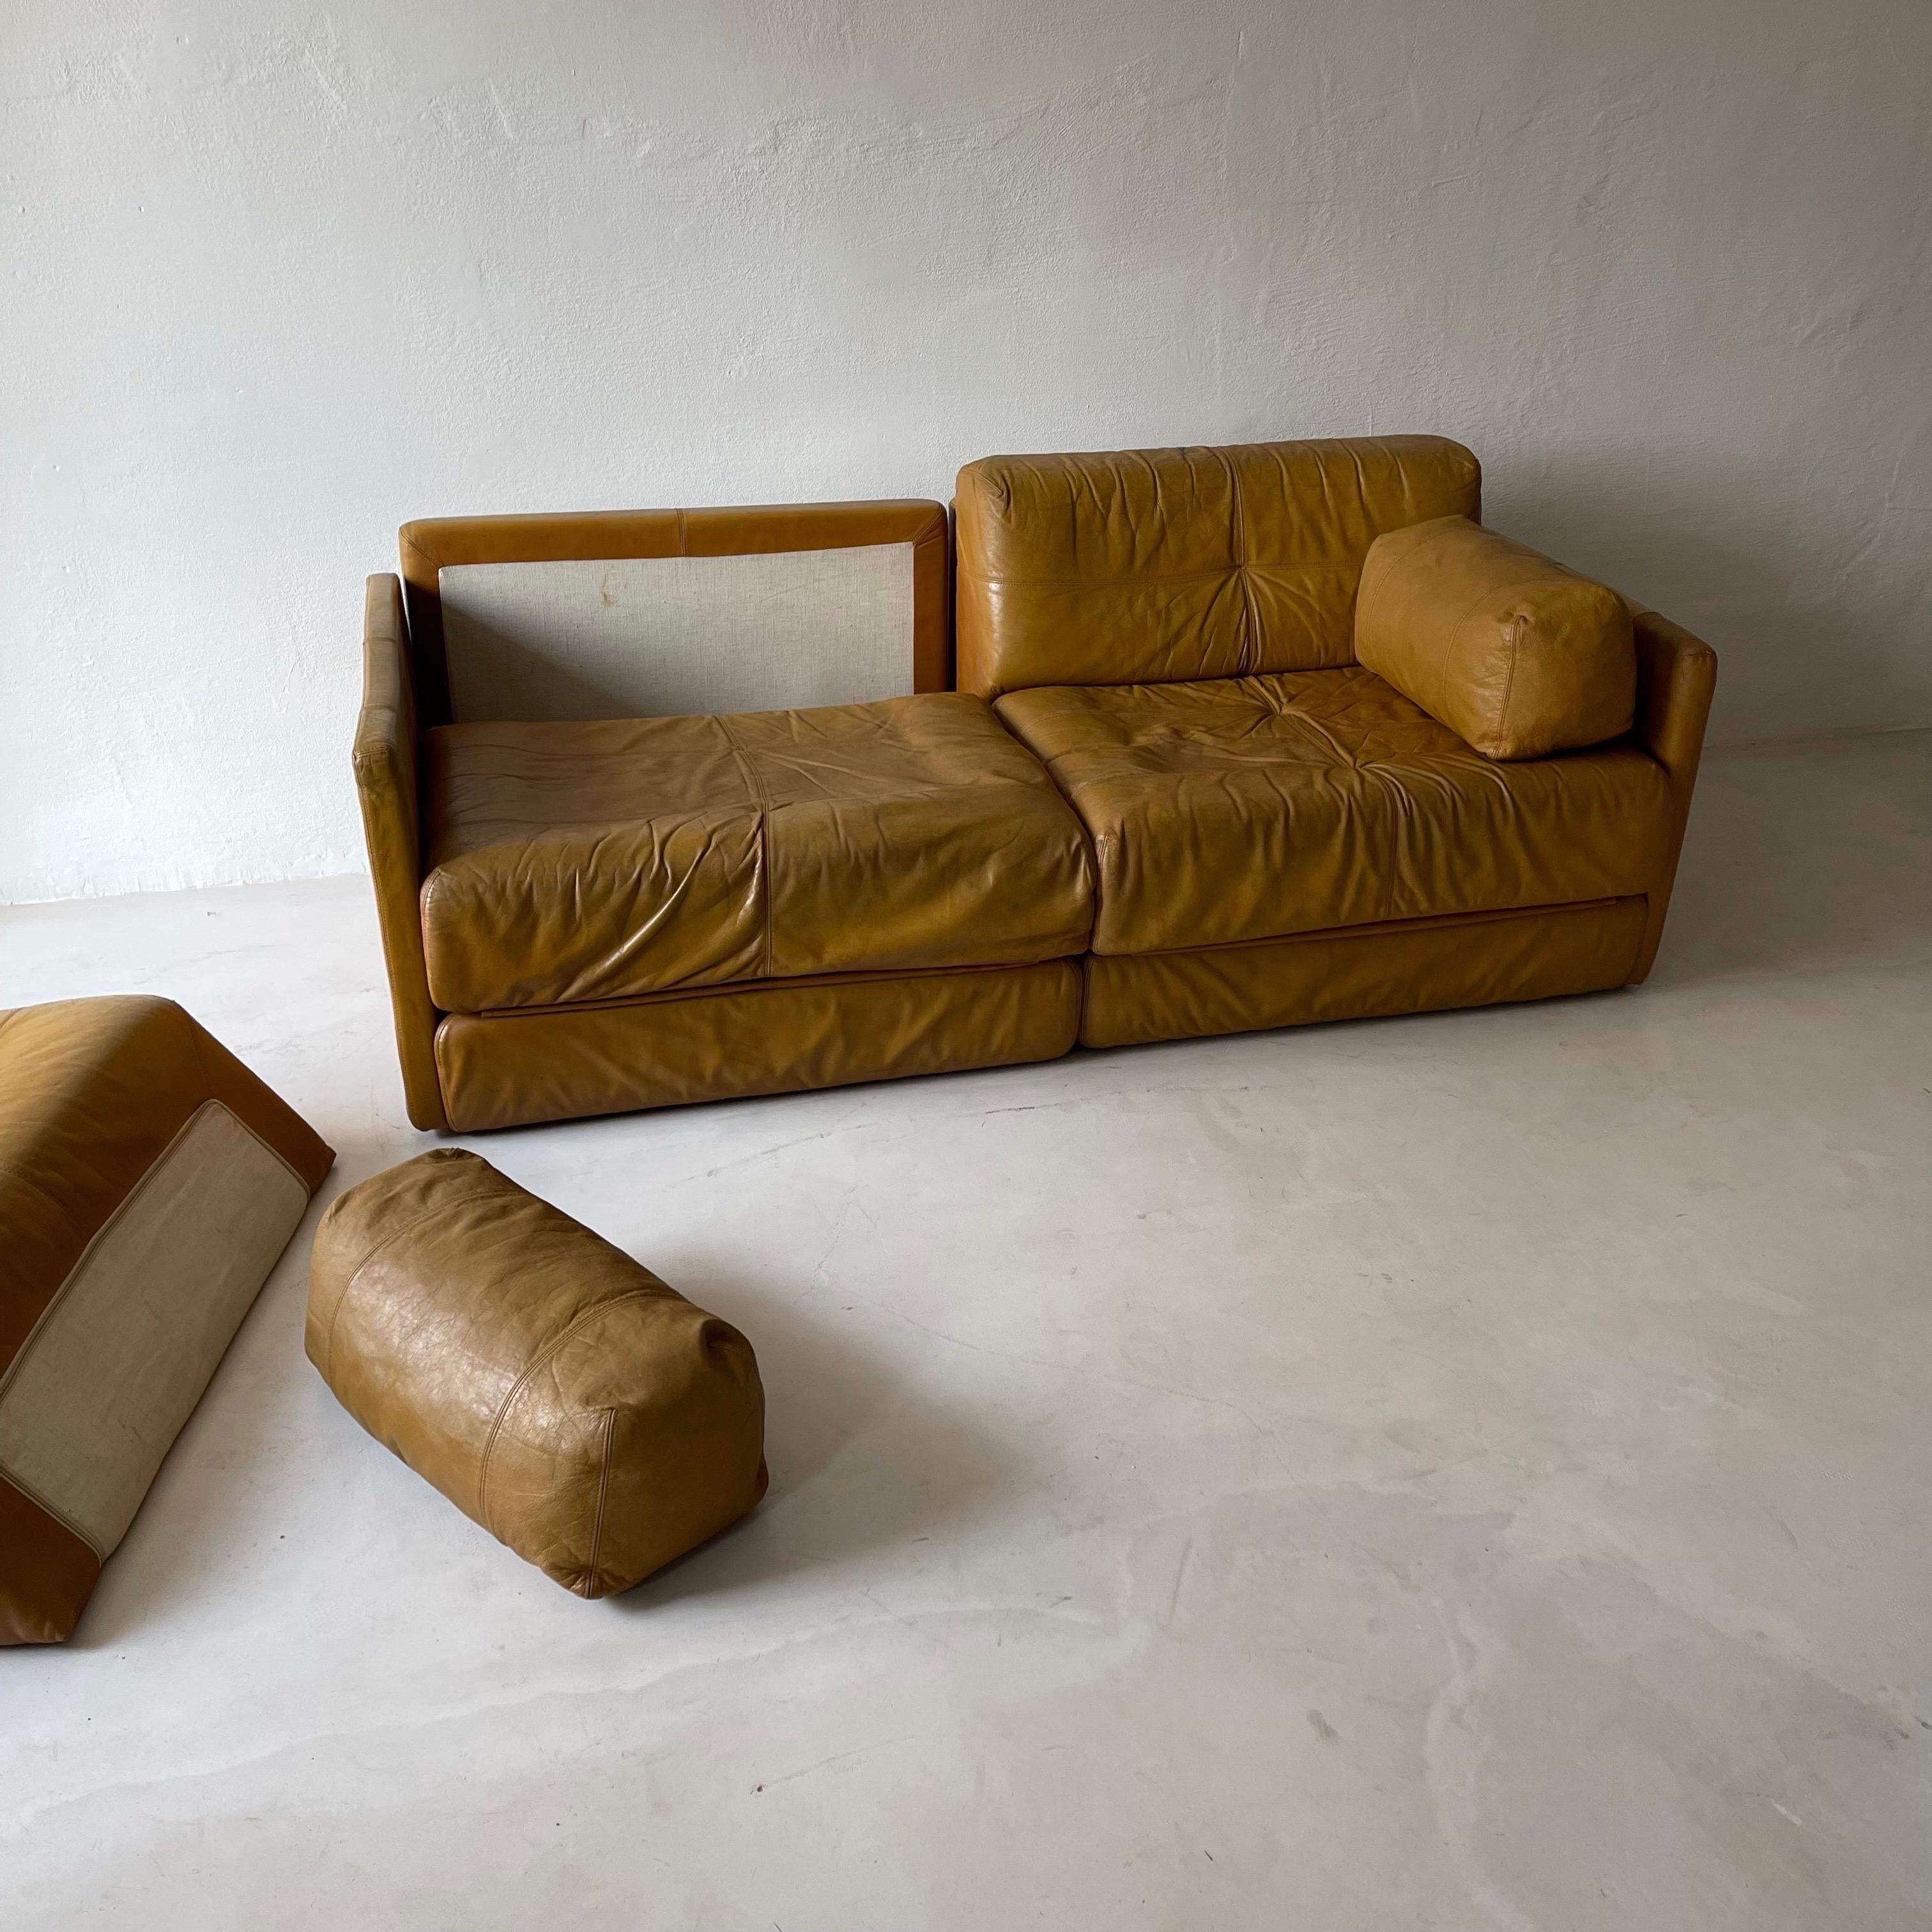 Wittmann Atrium Cognac Leather Daybed Sofa, 1970s For Sale 3